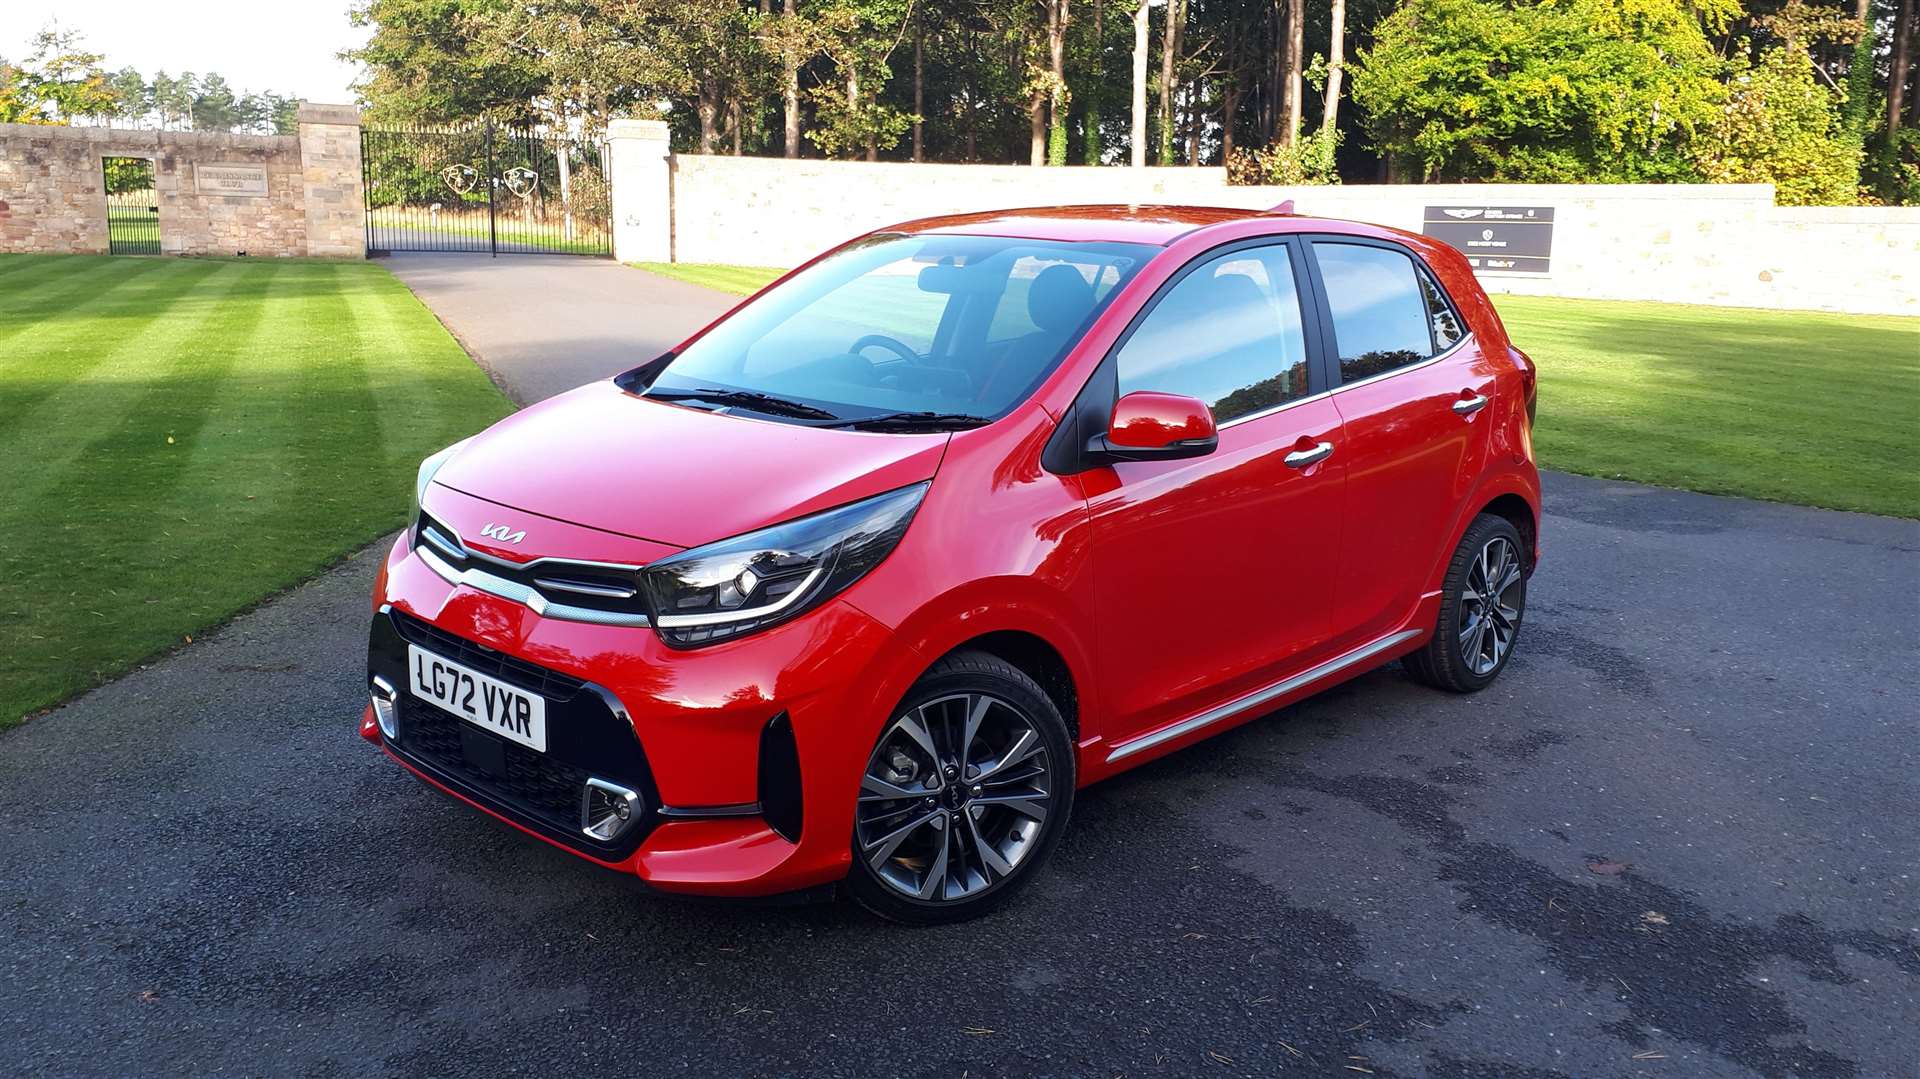 The latest Kia Picanto should be right up at the top of your list when considering a small car.